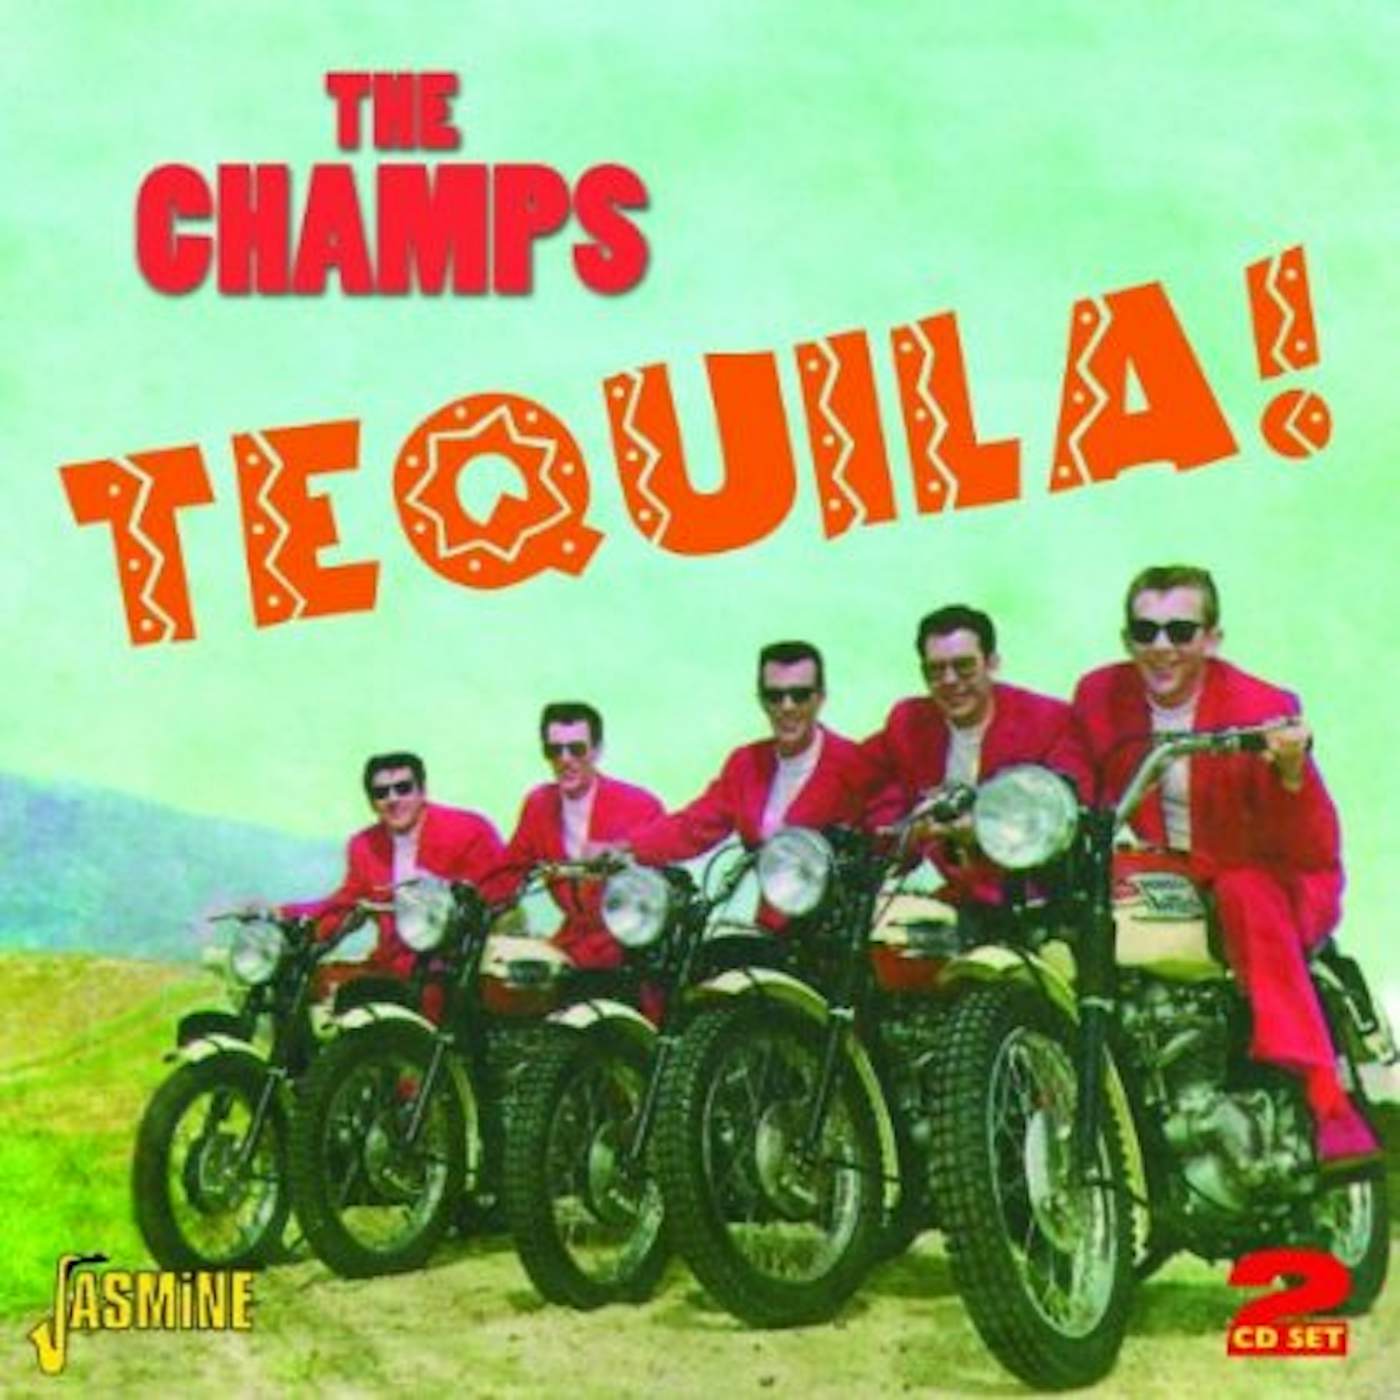 CHAMPS TEQUILA CD